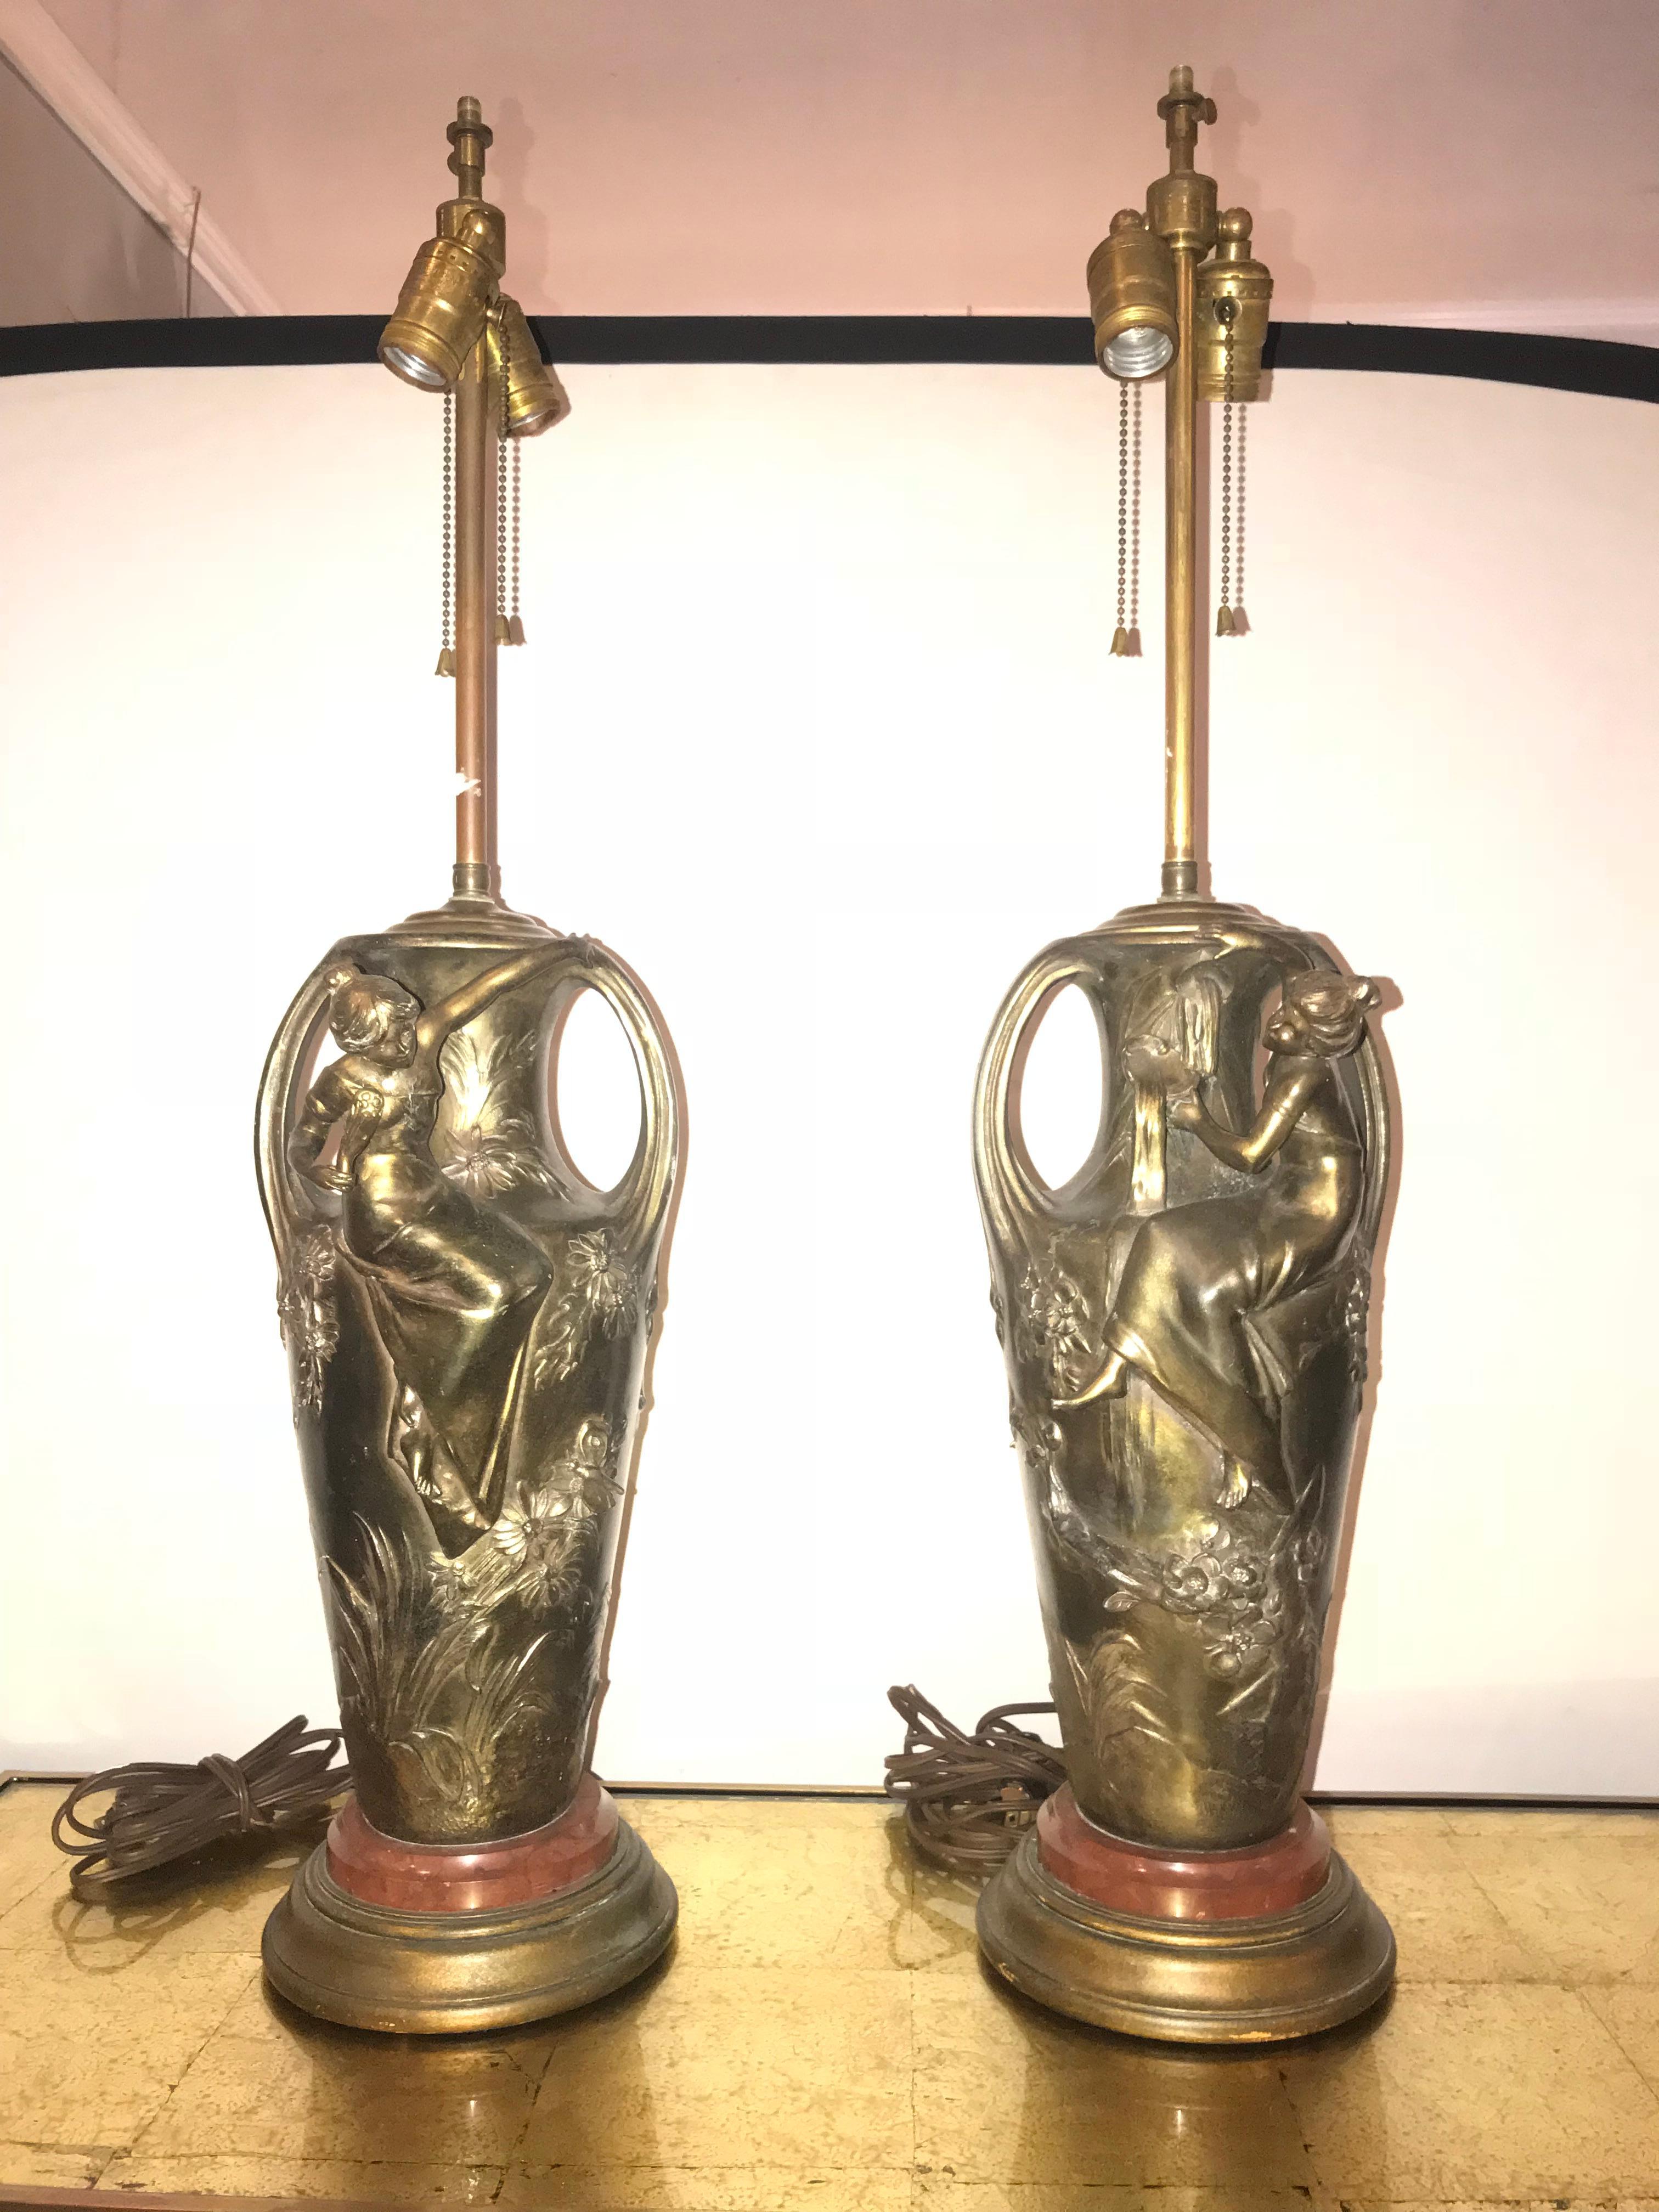 Pair of Art Nouveau figural urns mounted as lamps. These wonderfully cast urns are mounted as table lamps. Each having a young maiden climbing onto a large urn with flowers, vines and the like detailed in a wonderful gold finish.